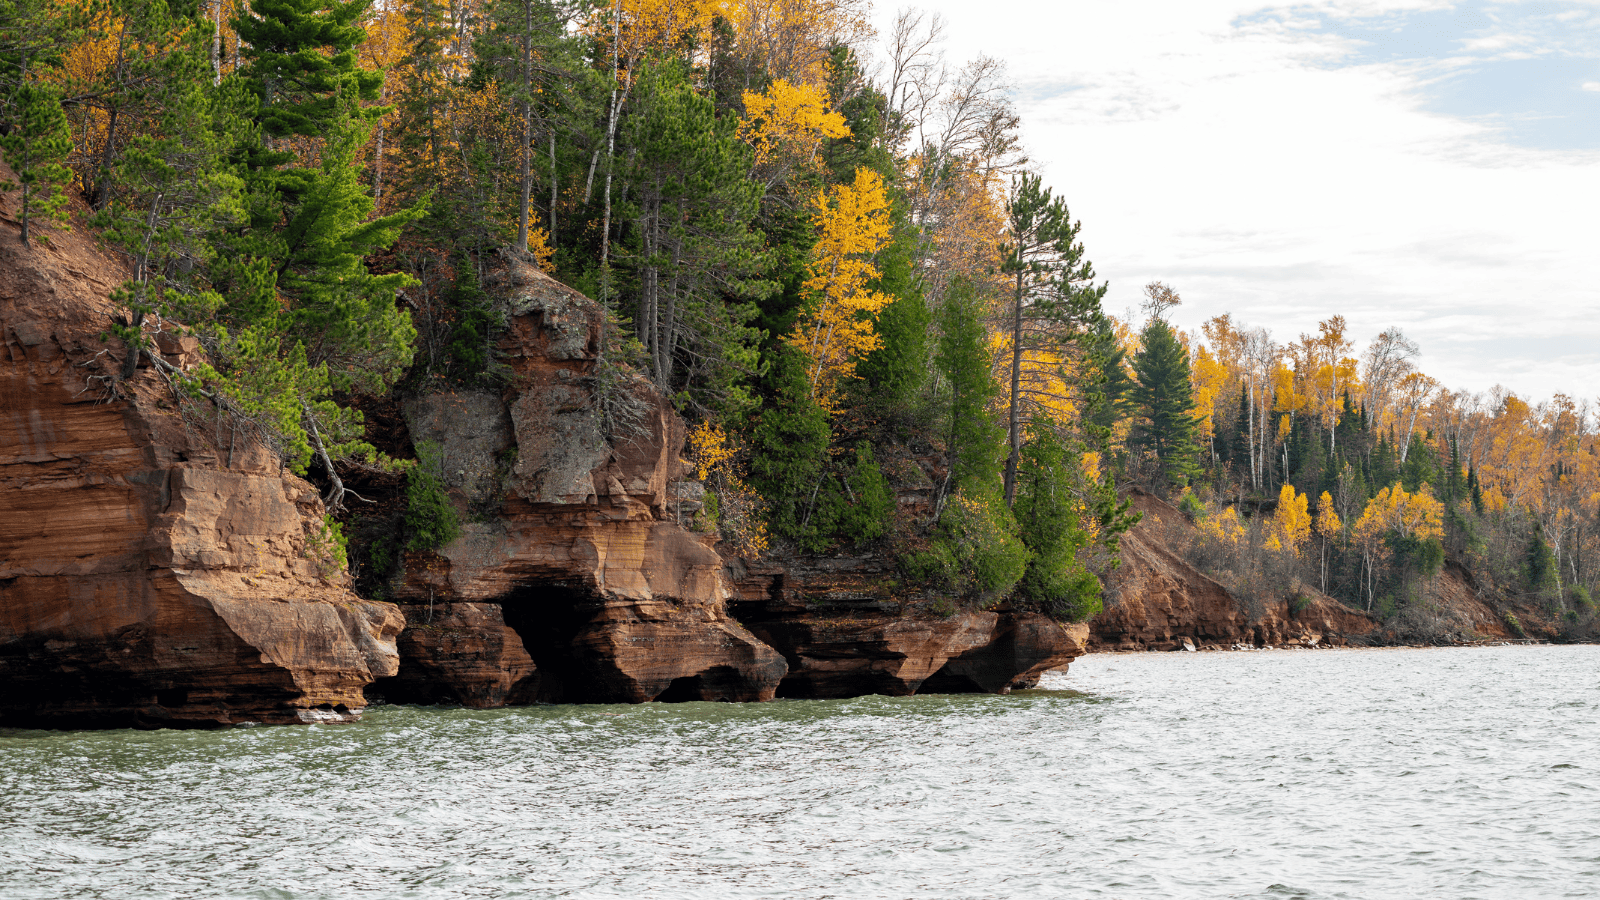 <p>If you’re looking for a unique kayaking experience in the US, the Apostle Islands in Wisconsin should definitely be on your list. The area is known for its rugged beauty, with 22 islands and over 800 species of plants. You can explore the area’s sandy beaches, sea caves, and rock formations while kayaking on Lake Superior.</p> <p>The Apostle Islands are also home to a variety of wildlife, including eagles, bears, and wolves. Fishing is also a popular activity in the area, with opportunities to catch trout, salmon, and walleye. Whether you’re an experienced kayaker or a beginner, there are plenty of options for guided tours, equipment rentals, and safety classes.</p> <p>Overall, the Apostle Islands offer a distinctive and enthralling kayaking experience for outdoor enthusiasts and nature lovers alike.</p>